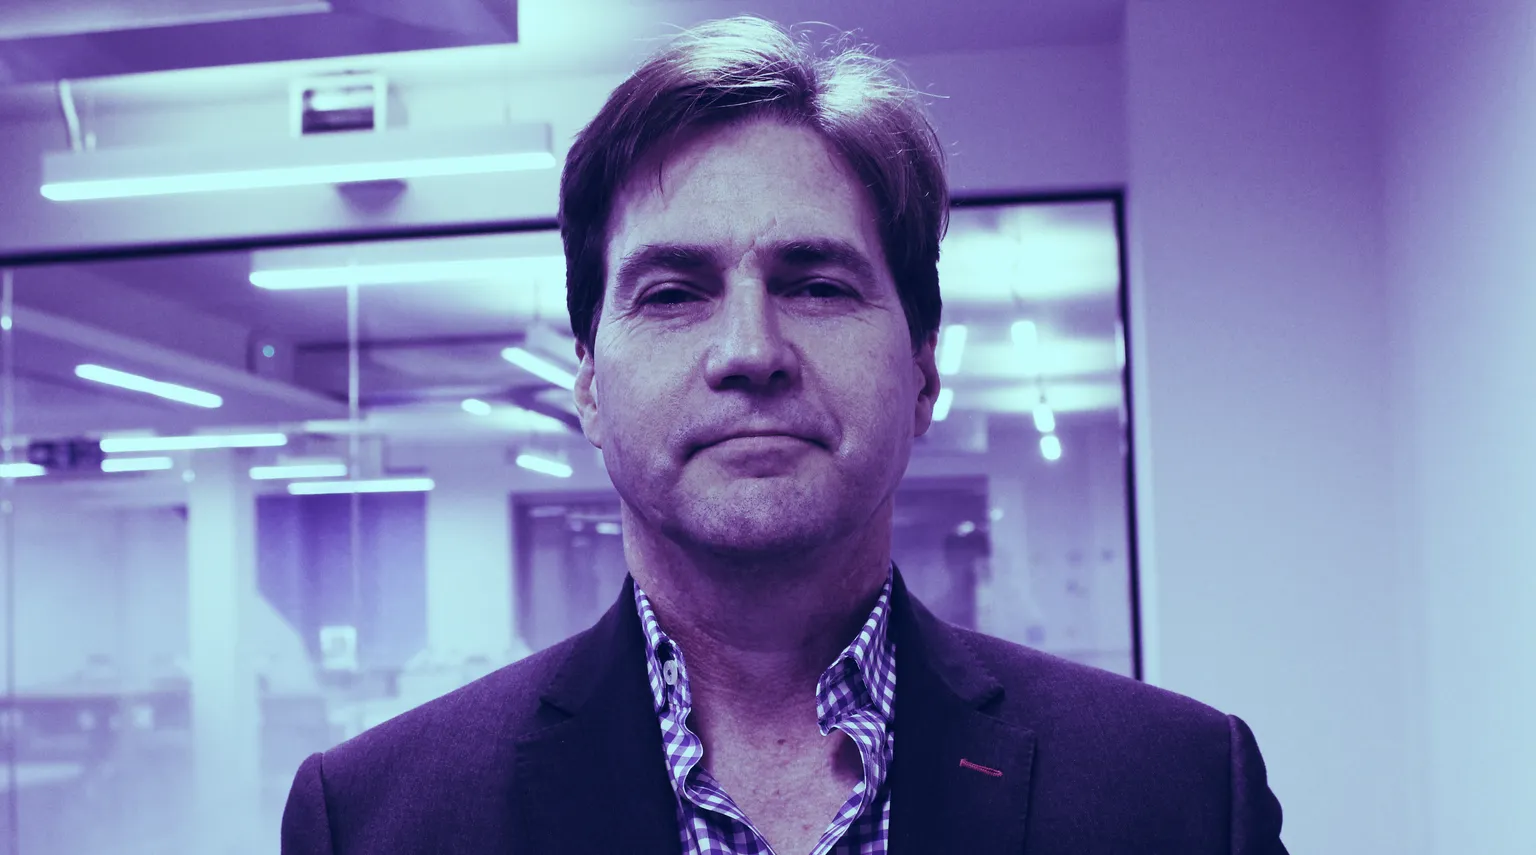 Craig Wright claims to have invented Bitcoin. Image: Decrypt.